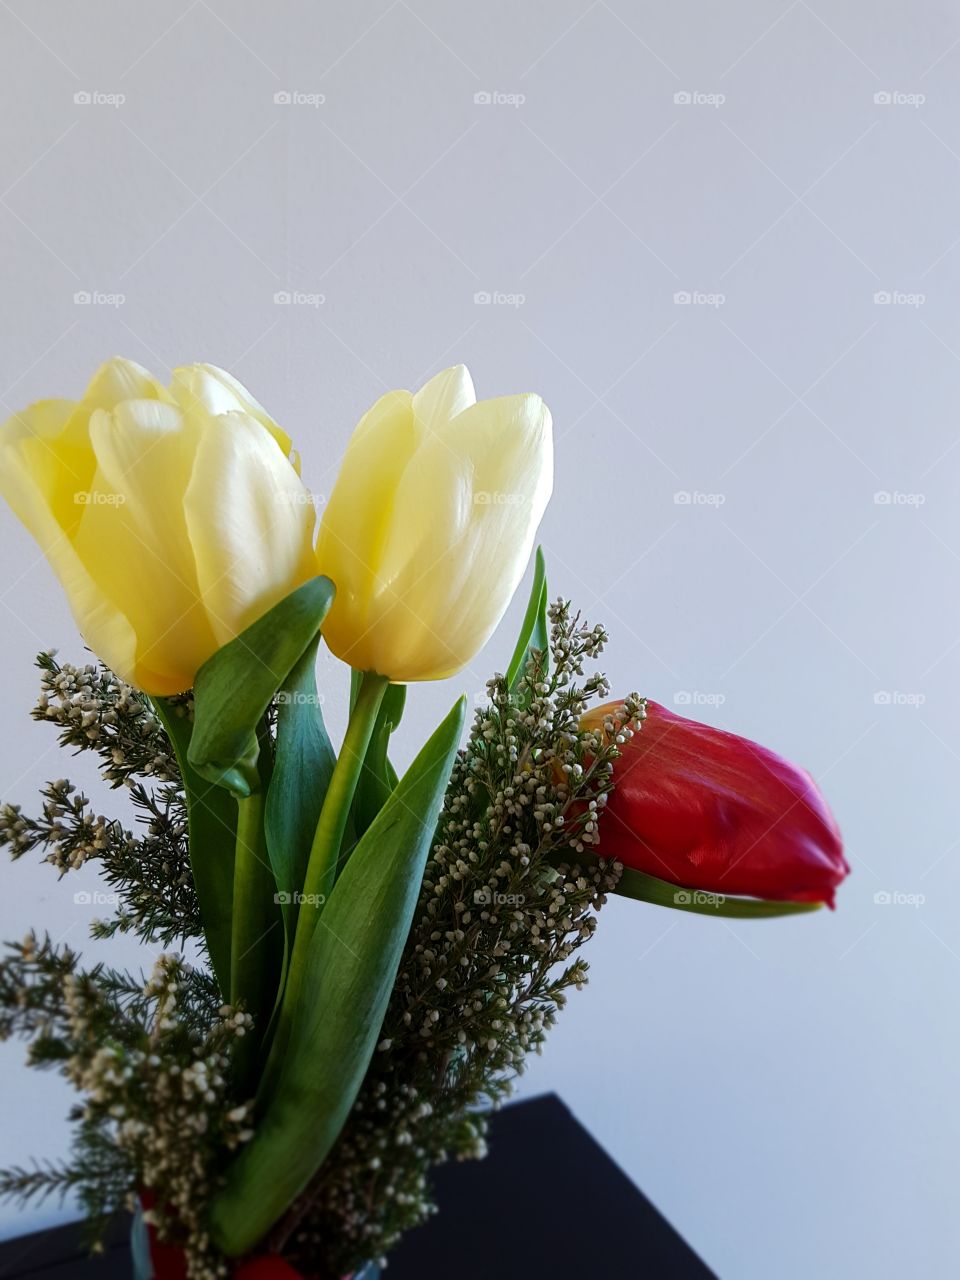 Nature, Flower, Easter, No Person, Tulip